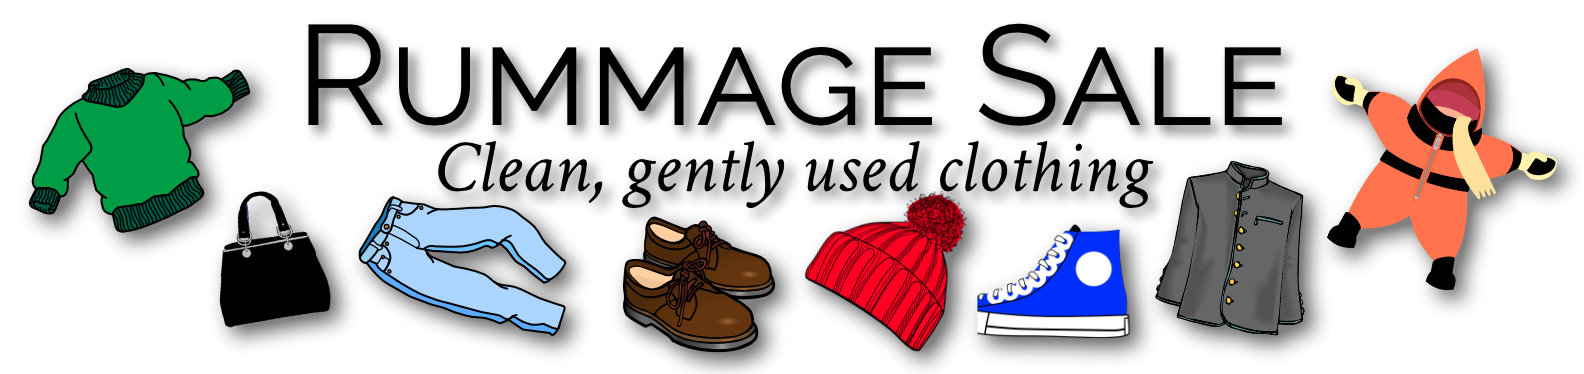 Rummage sale for gently used clothing showing shirts, pants, shoes, hats and jackets